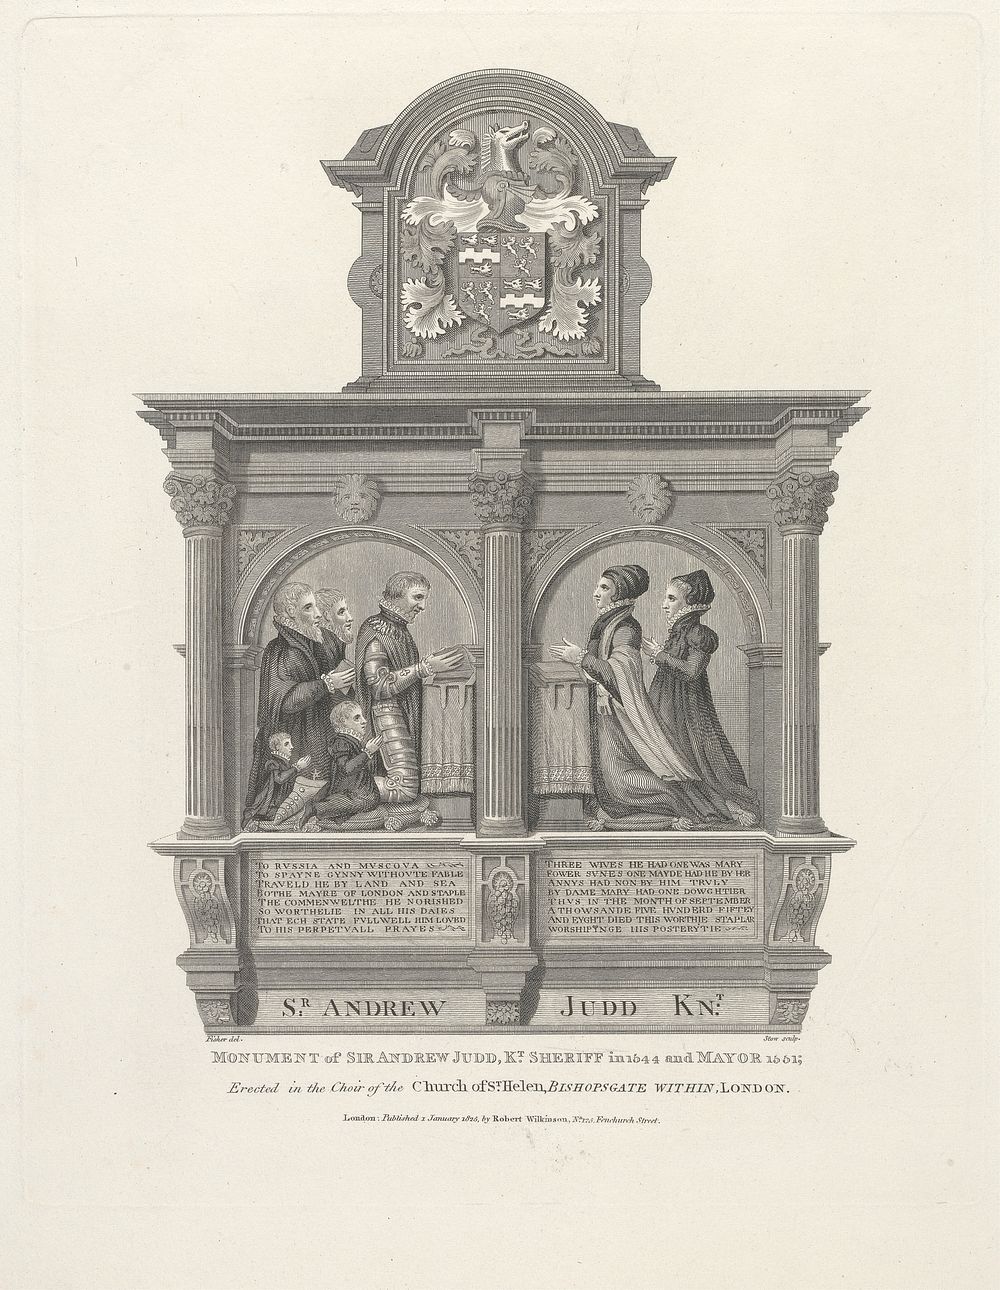 Monument of Sir Andrew Judd in the Choir of St. Helen, Bishopsgate